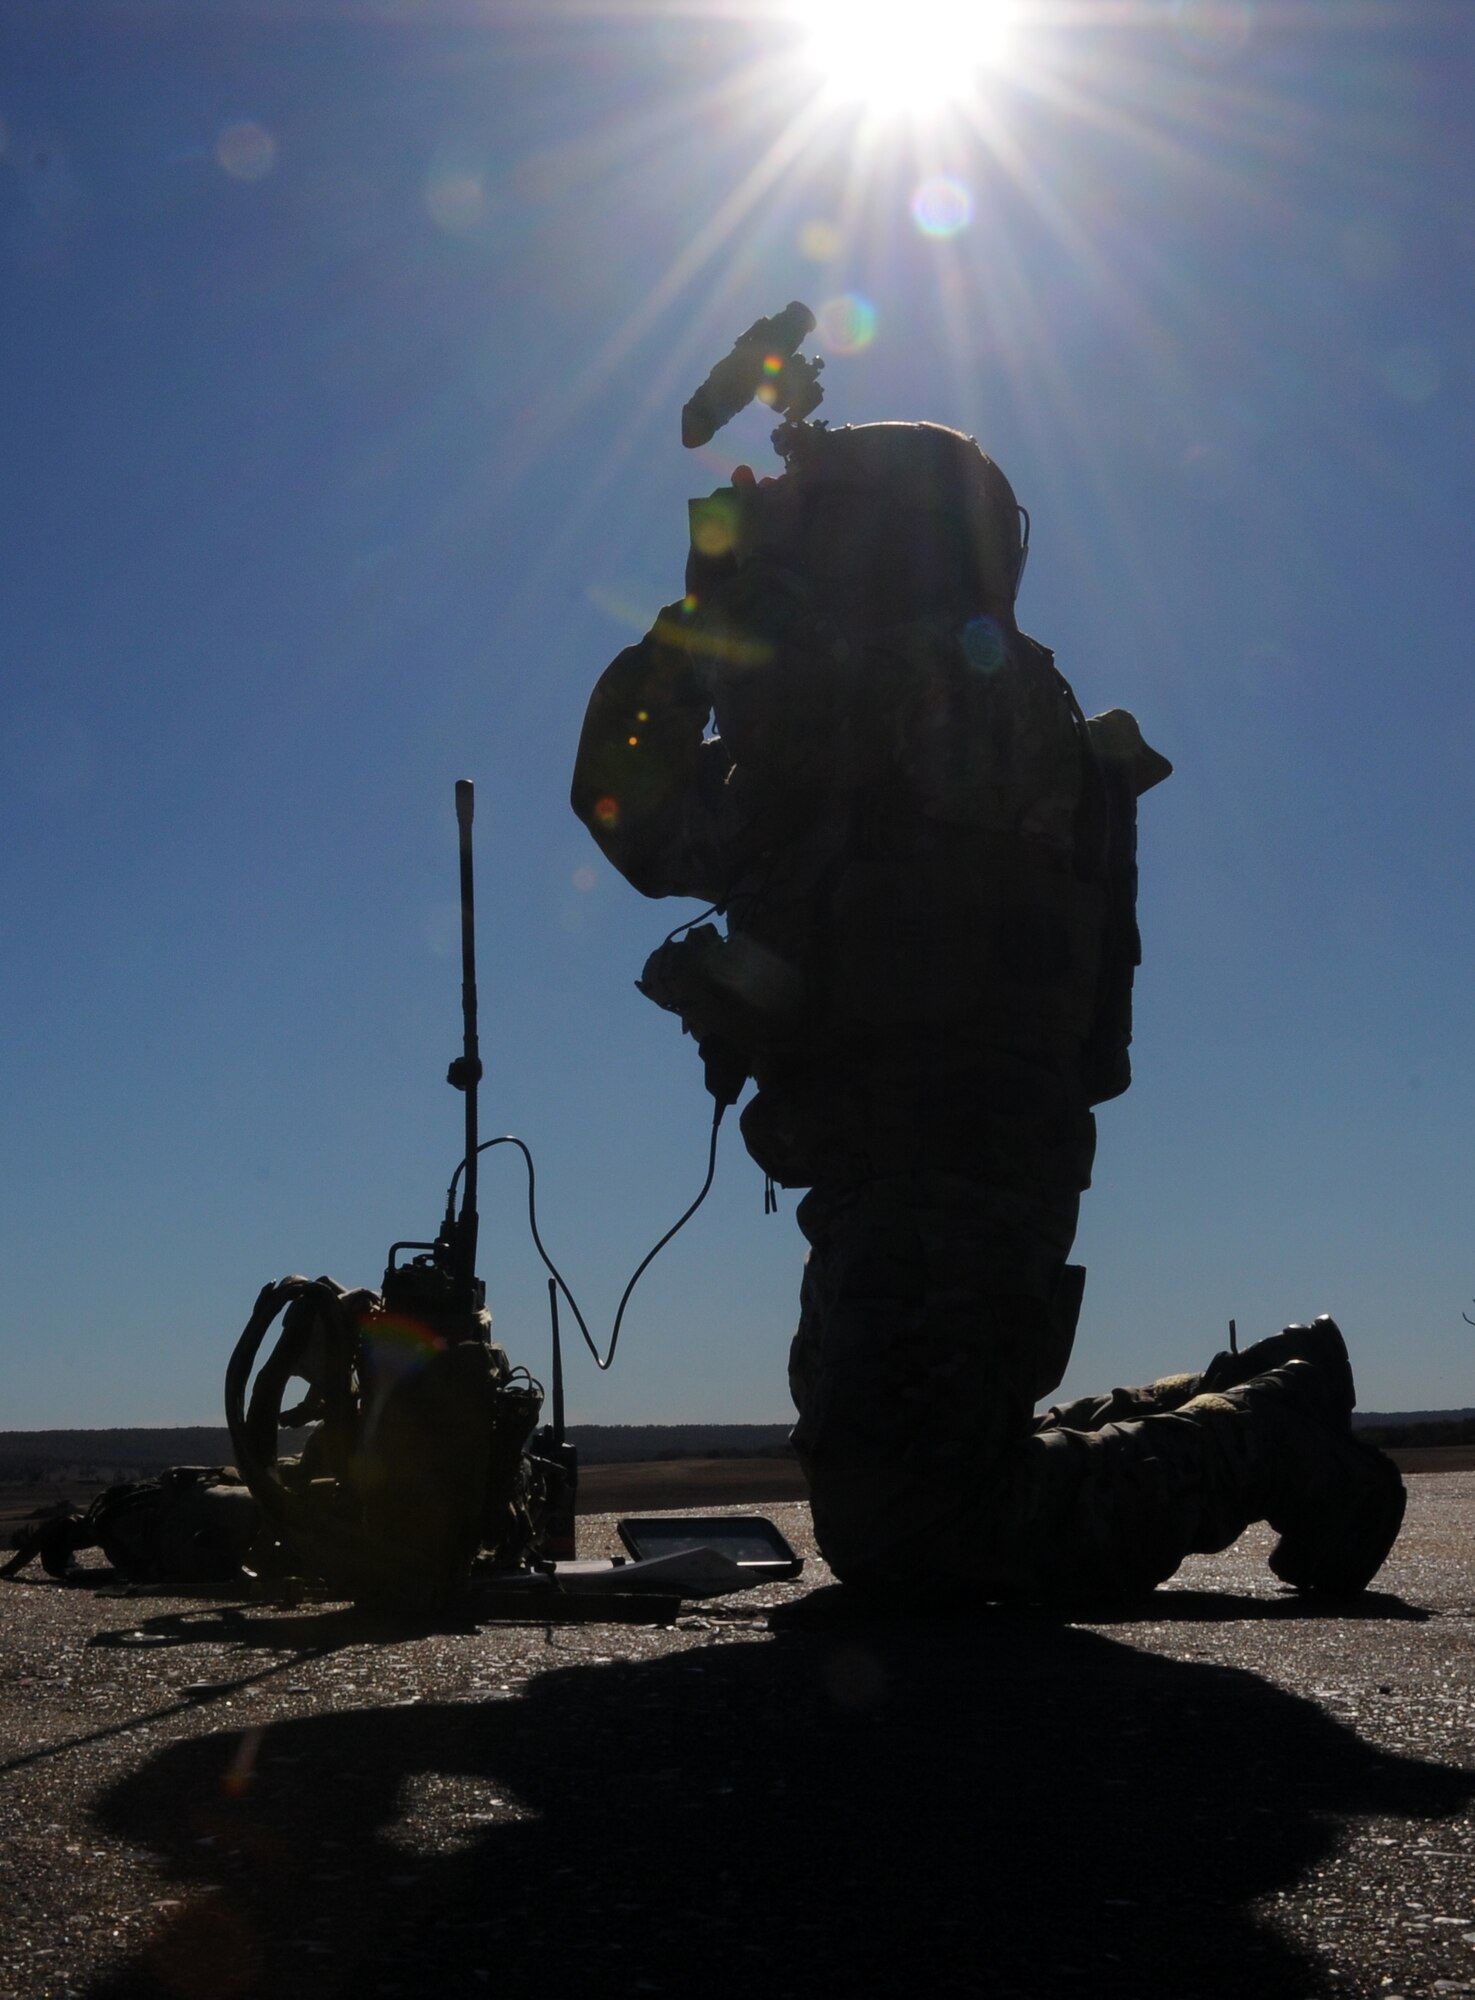 Tech. Sgt. Robert G. Ellis II scans the horizon at 188th Wing Detachment 1 Razorback Range at Fort Chaffee Joint Maneuver Training Center, Ark., Nov. 6, 2014. Ellis was selected as The Flying Razorback spotlight for December 2014. Ellis is the 188th’s joint terminal attack controller (JTAC) trainer. He trains Special Operations JTACs from every branch to ensure they maintain their certifications and they’re prepared for future combat deployments. (U.S. Air National Guard photo by Airman 1st Class Cody Martin/Released)